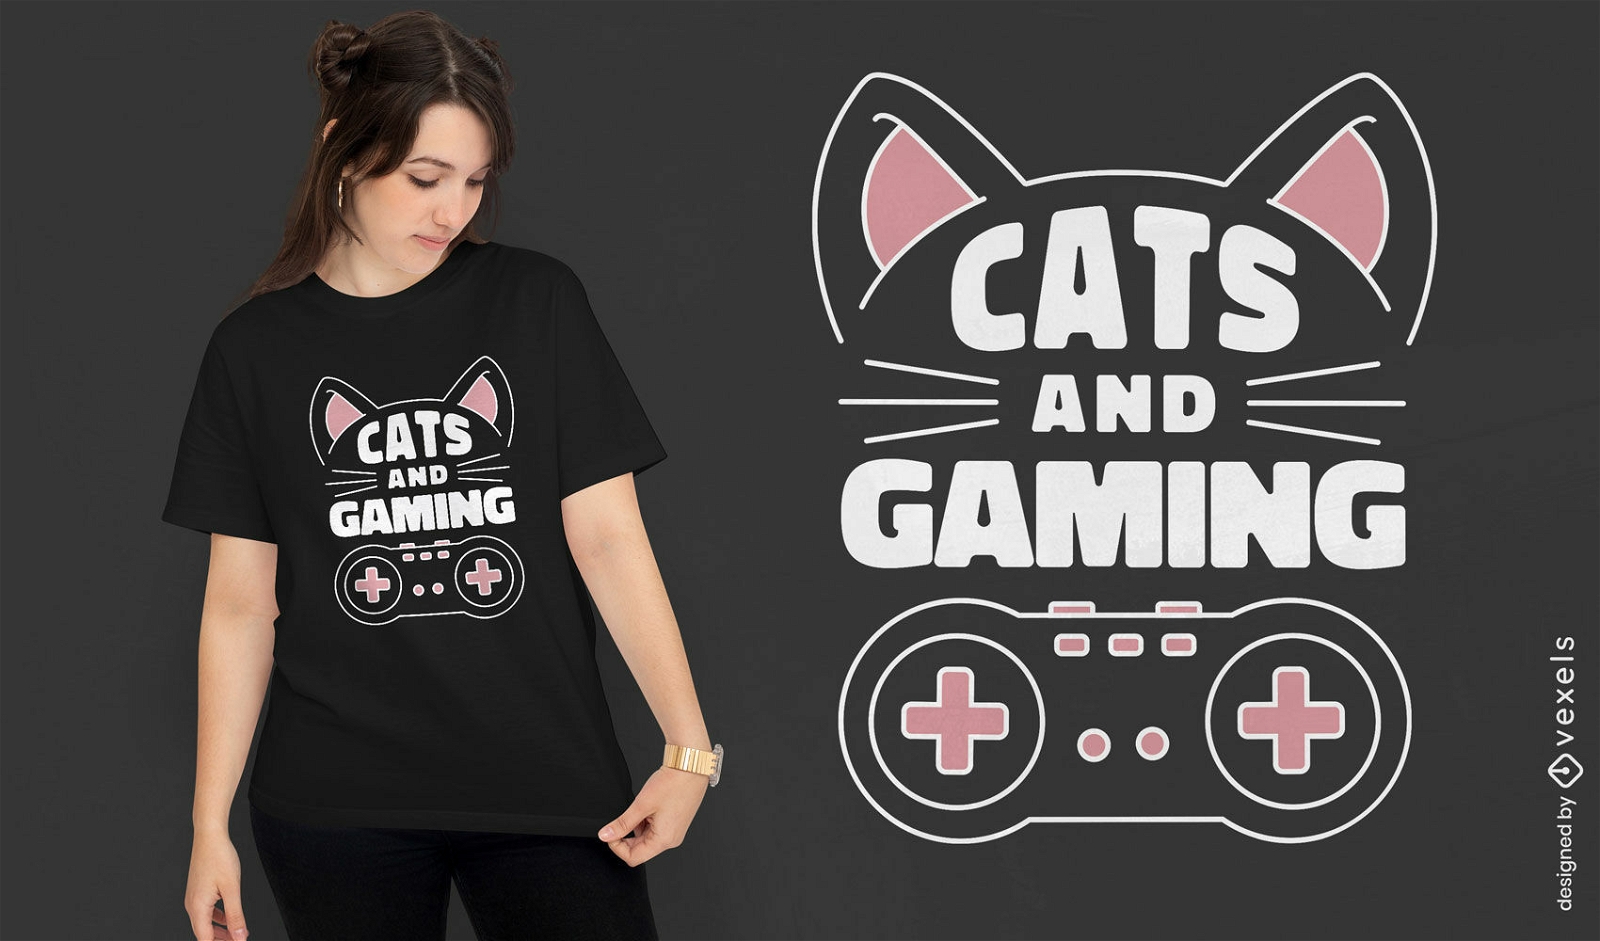 Cats and gaming t-shirt design